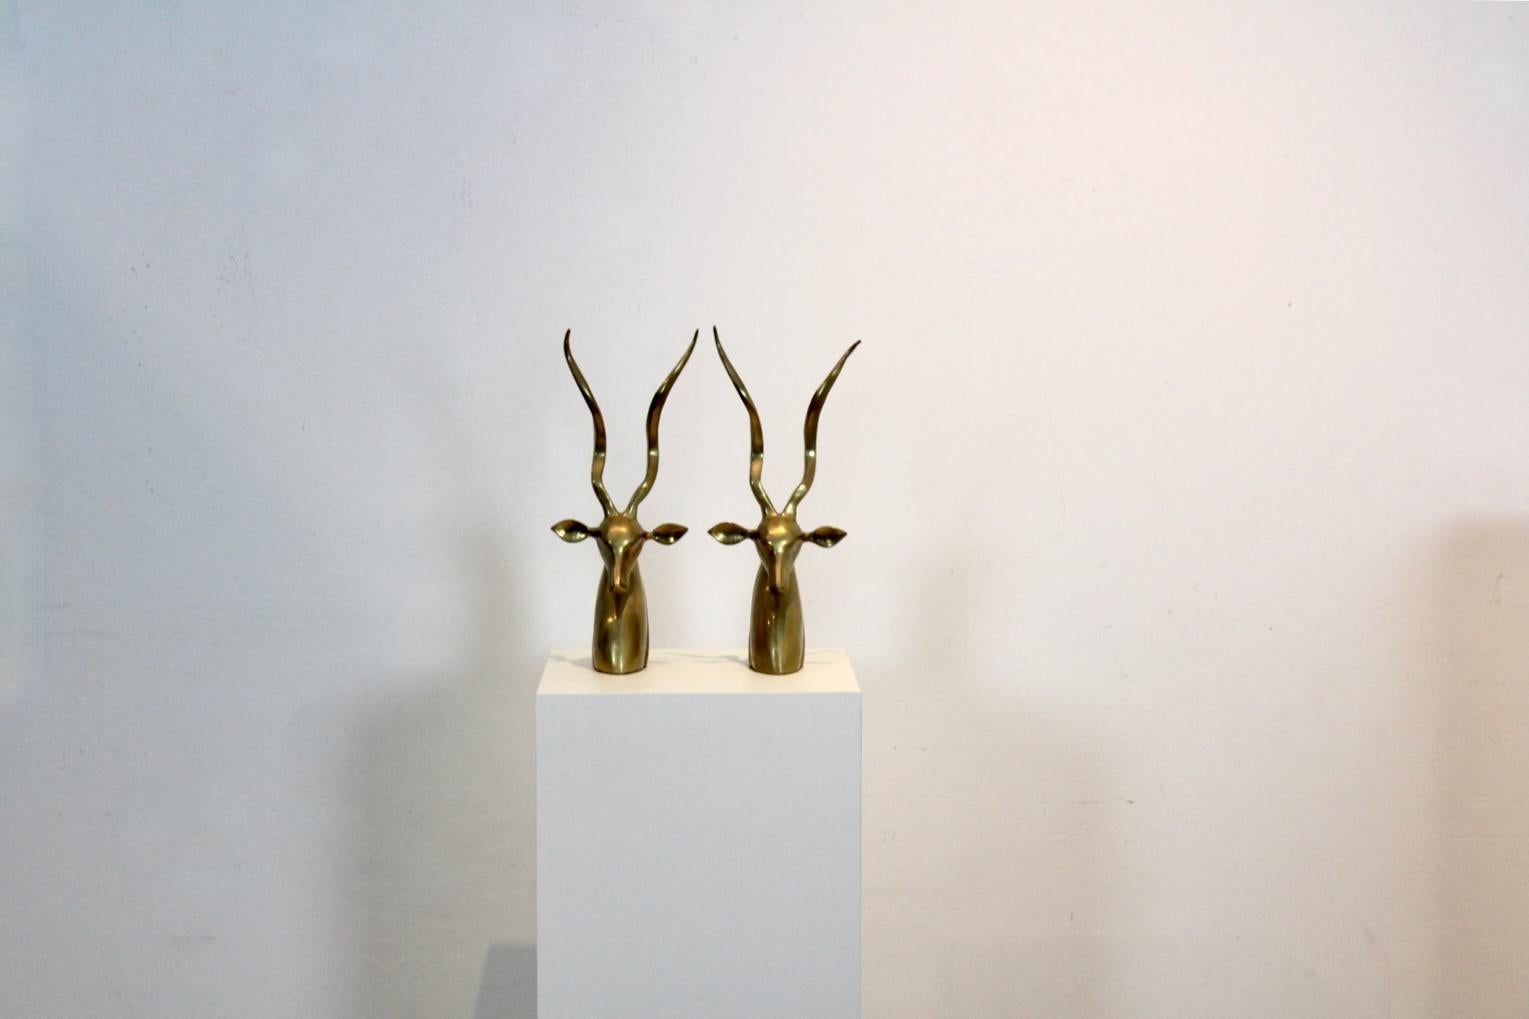 Exclusive and Graceful Brass set of Kudu/ Antelope Busts designed by Karl Springer. The set consists of two solid brass bust with tall twisted horns. There is a certain asymmetry to the piece, which reflect the organic nature of the subject. This